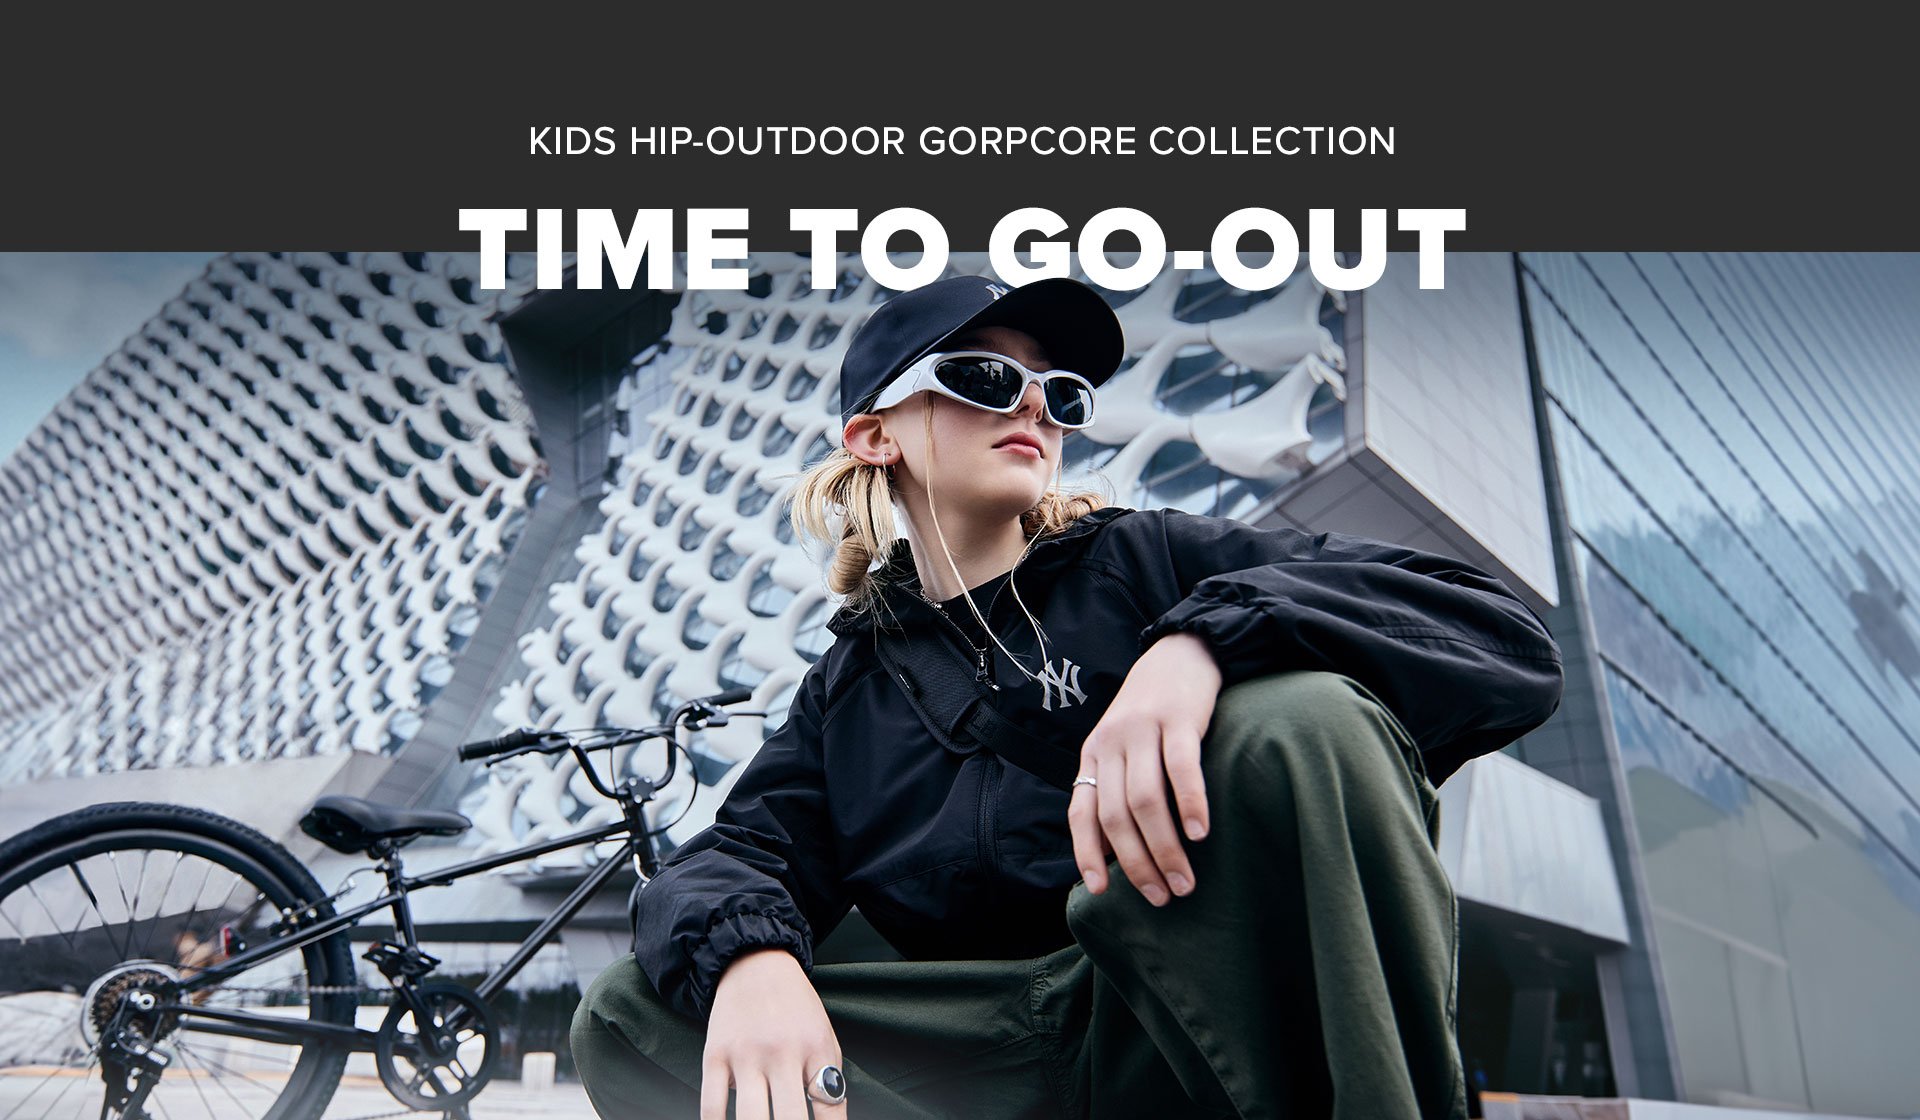 KIDS HIP-OUTDOOR GORPCORE COLLECTION TIME TO GO-OUT